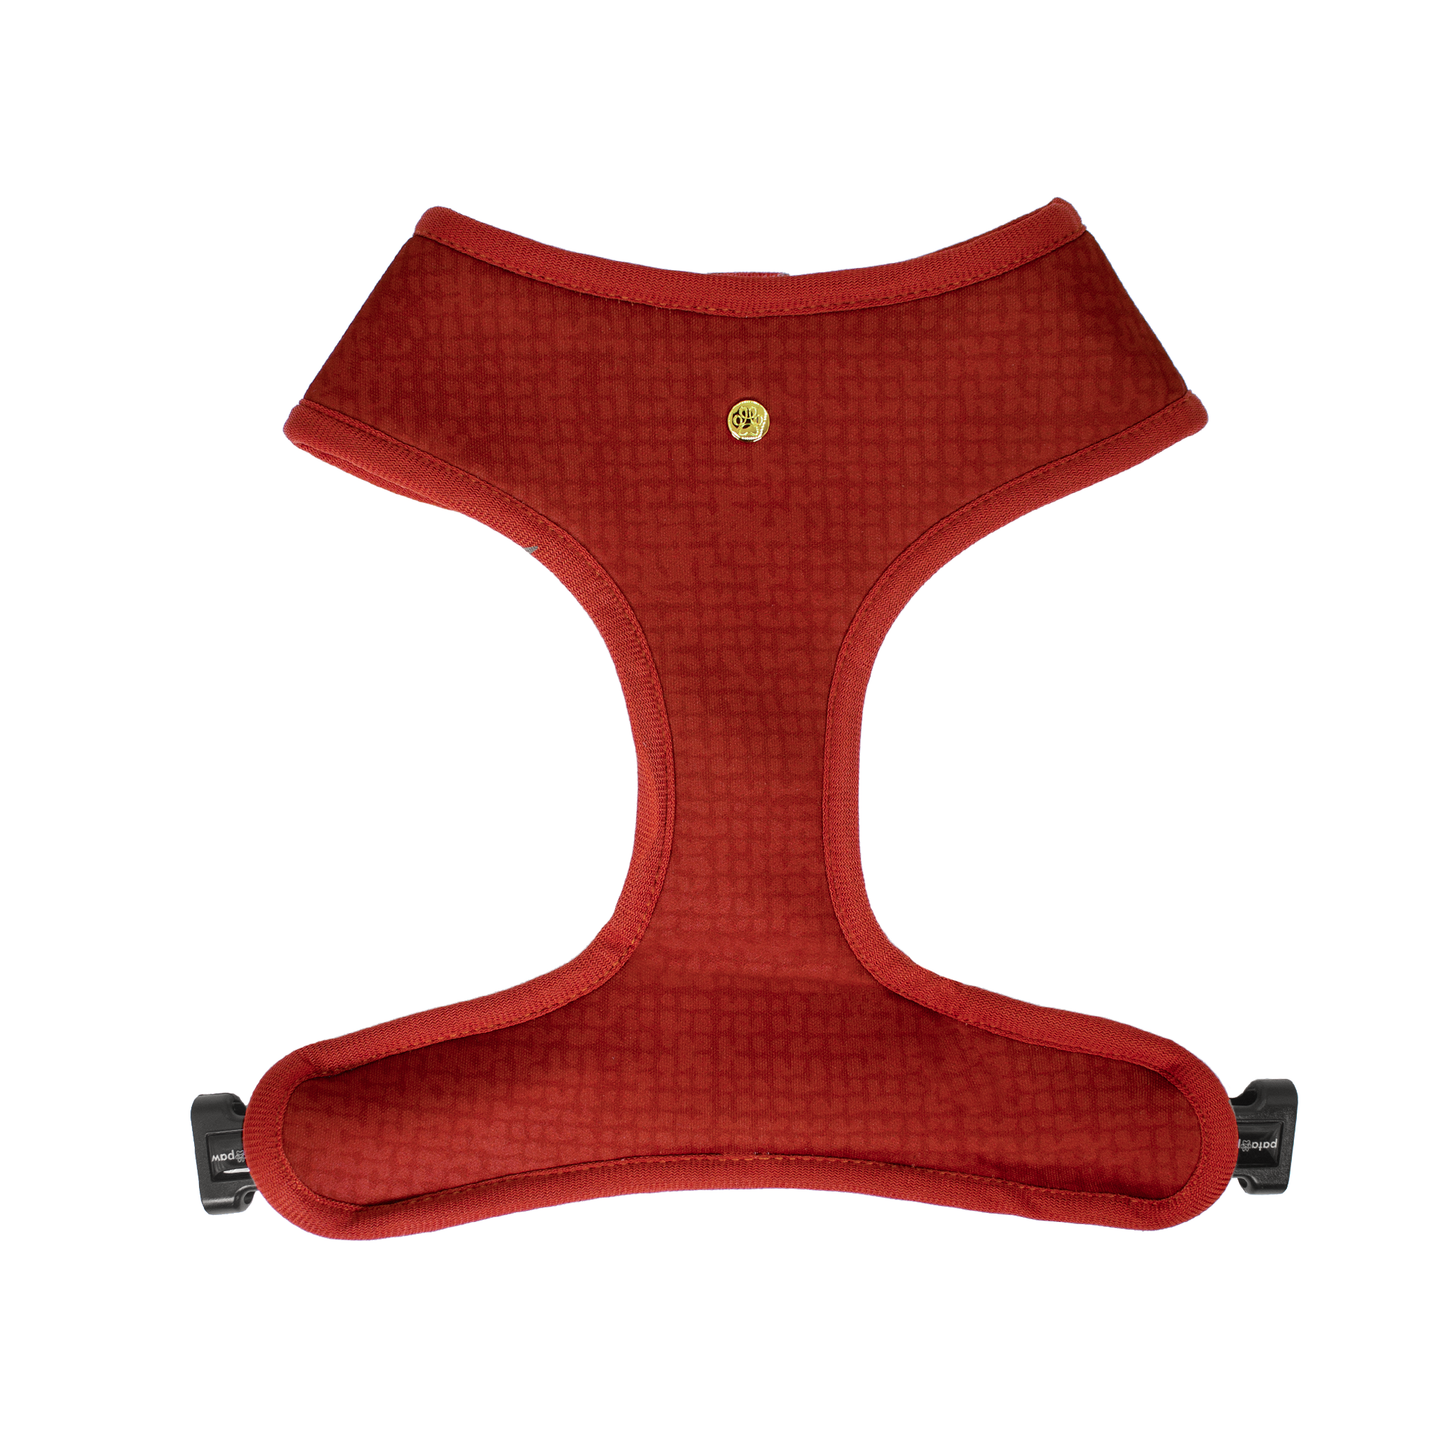 Pata Paw autumn crunch reversible harness showing a timeless and chic texture pattern in cherrywood.